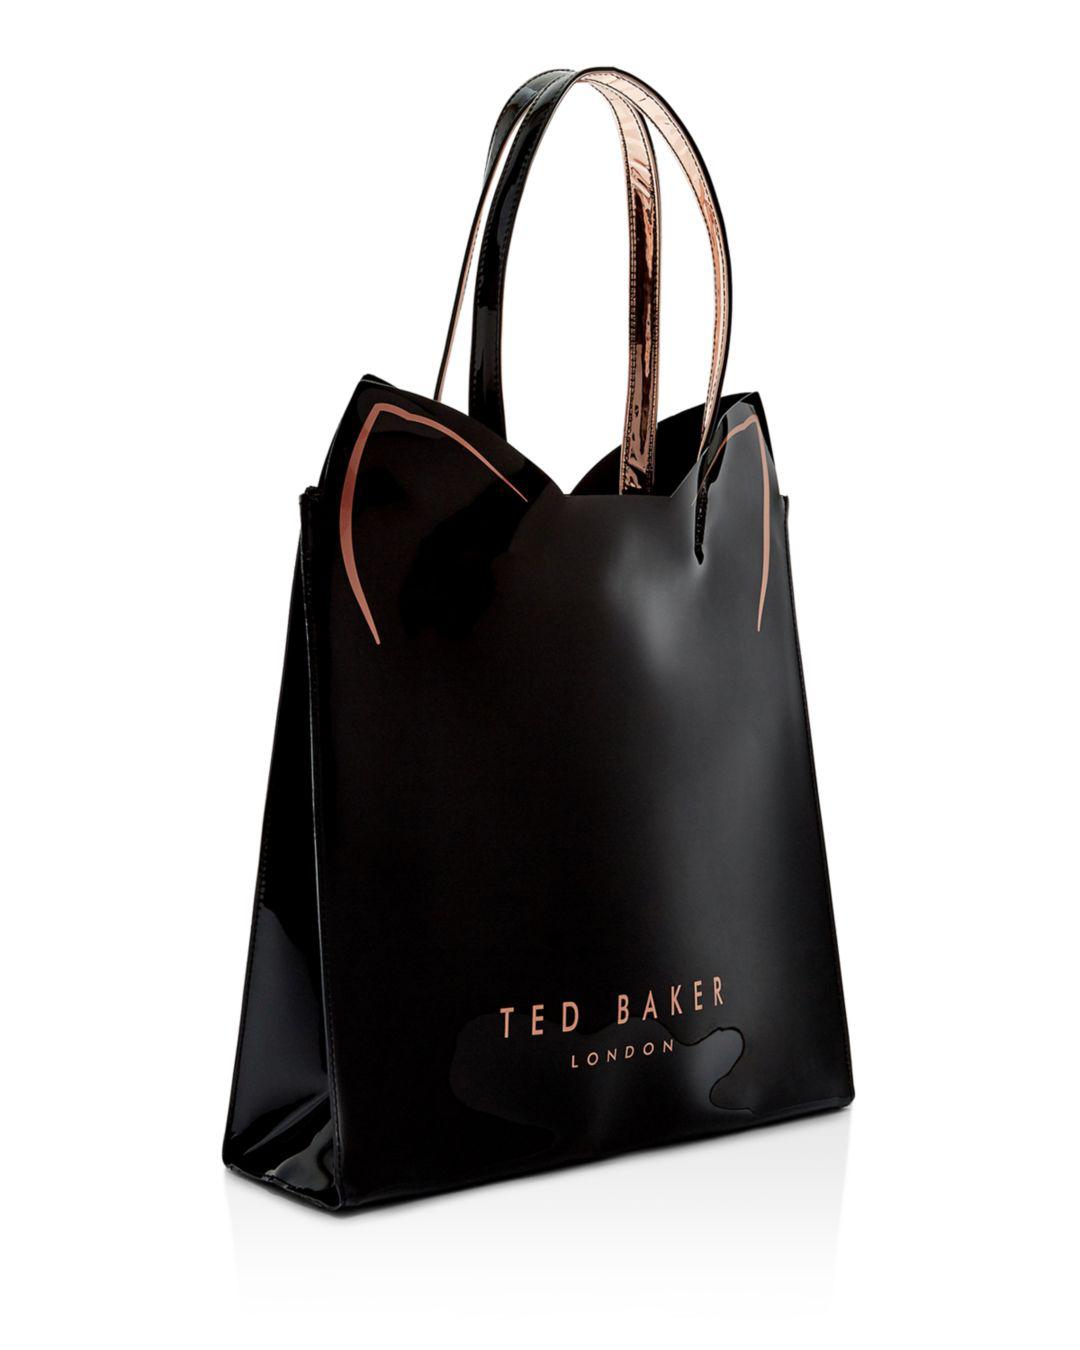 Ted Baker Synthetic Cat Large Icon Bag in Black/Rose Gold (Black) - Lyst